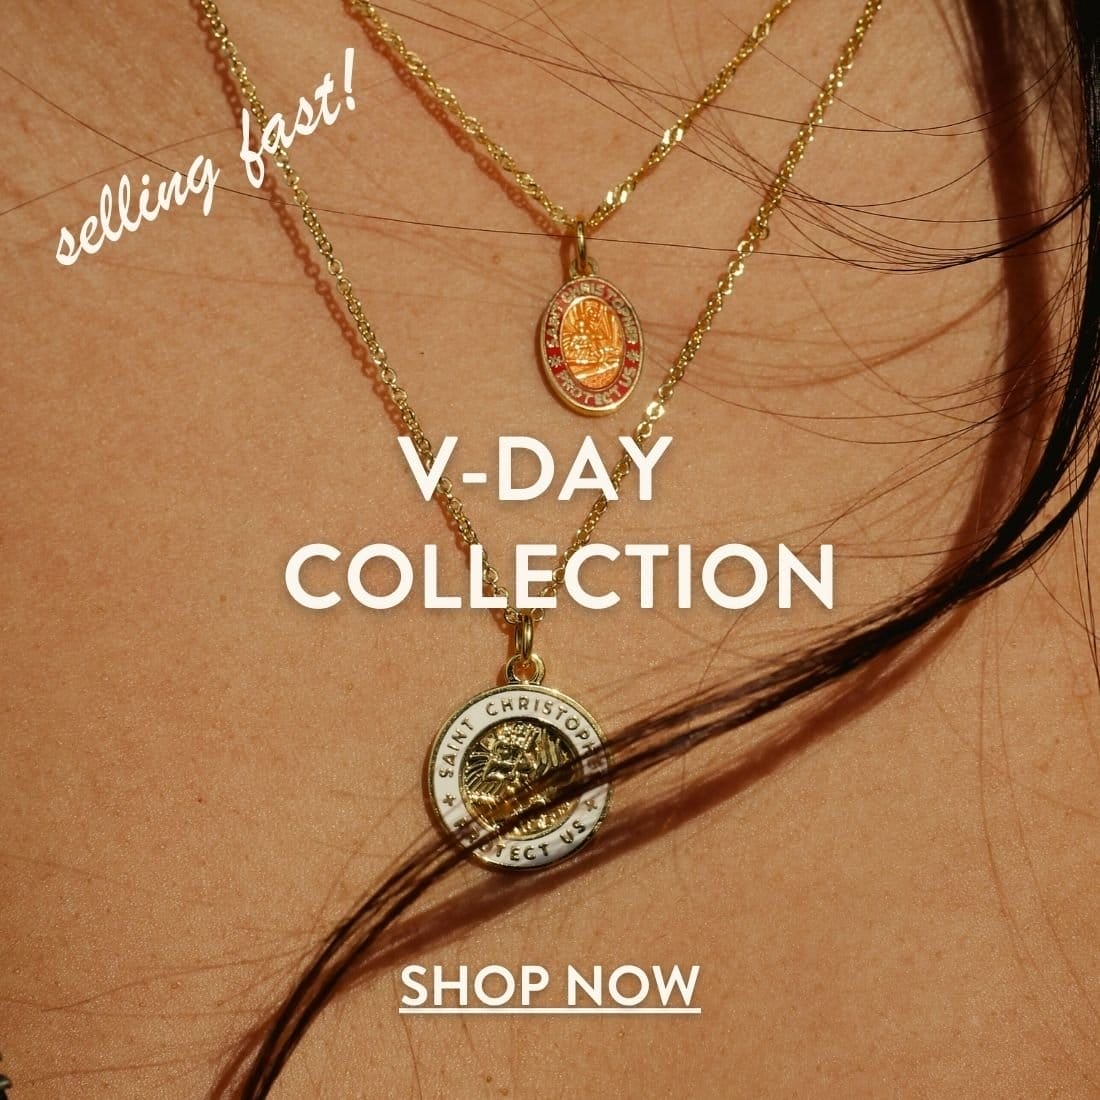 SHOP VDAY COLLECTION